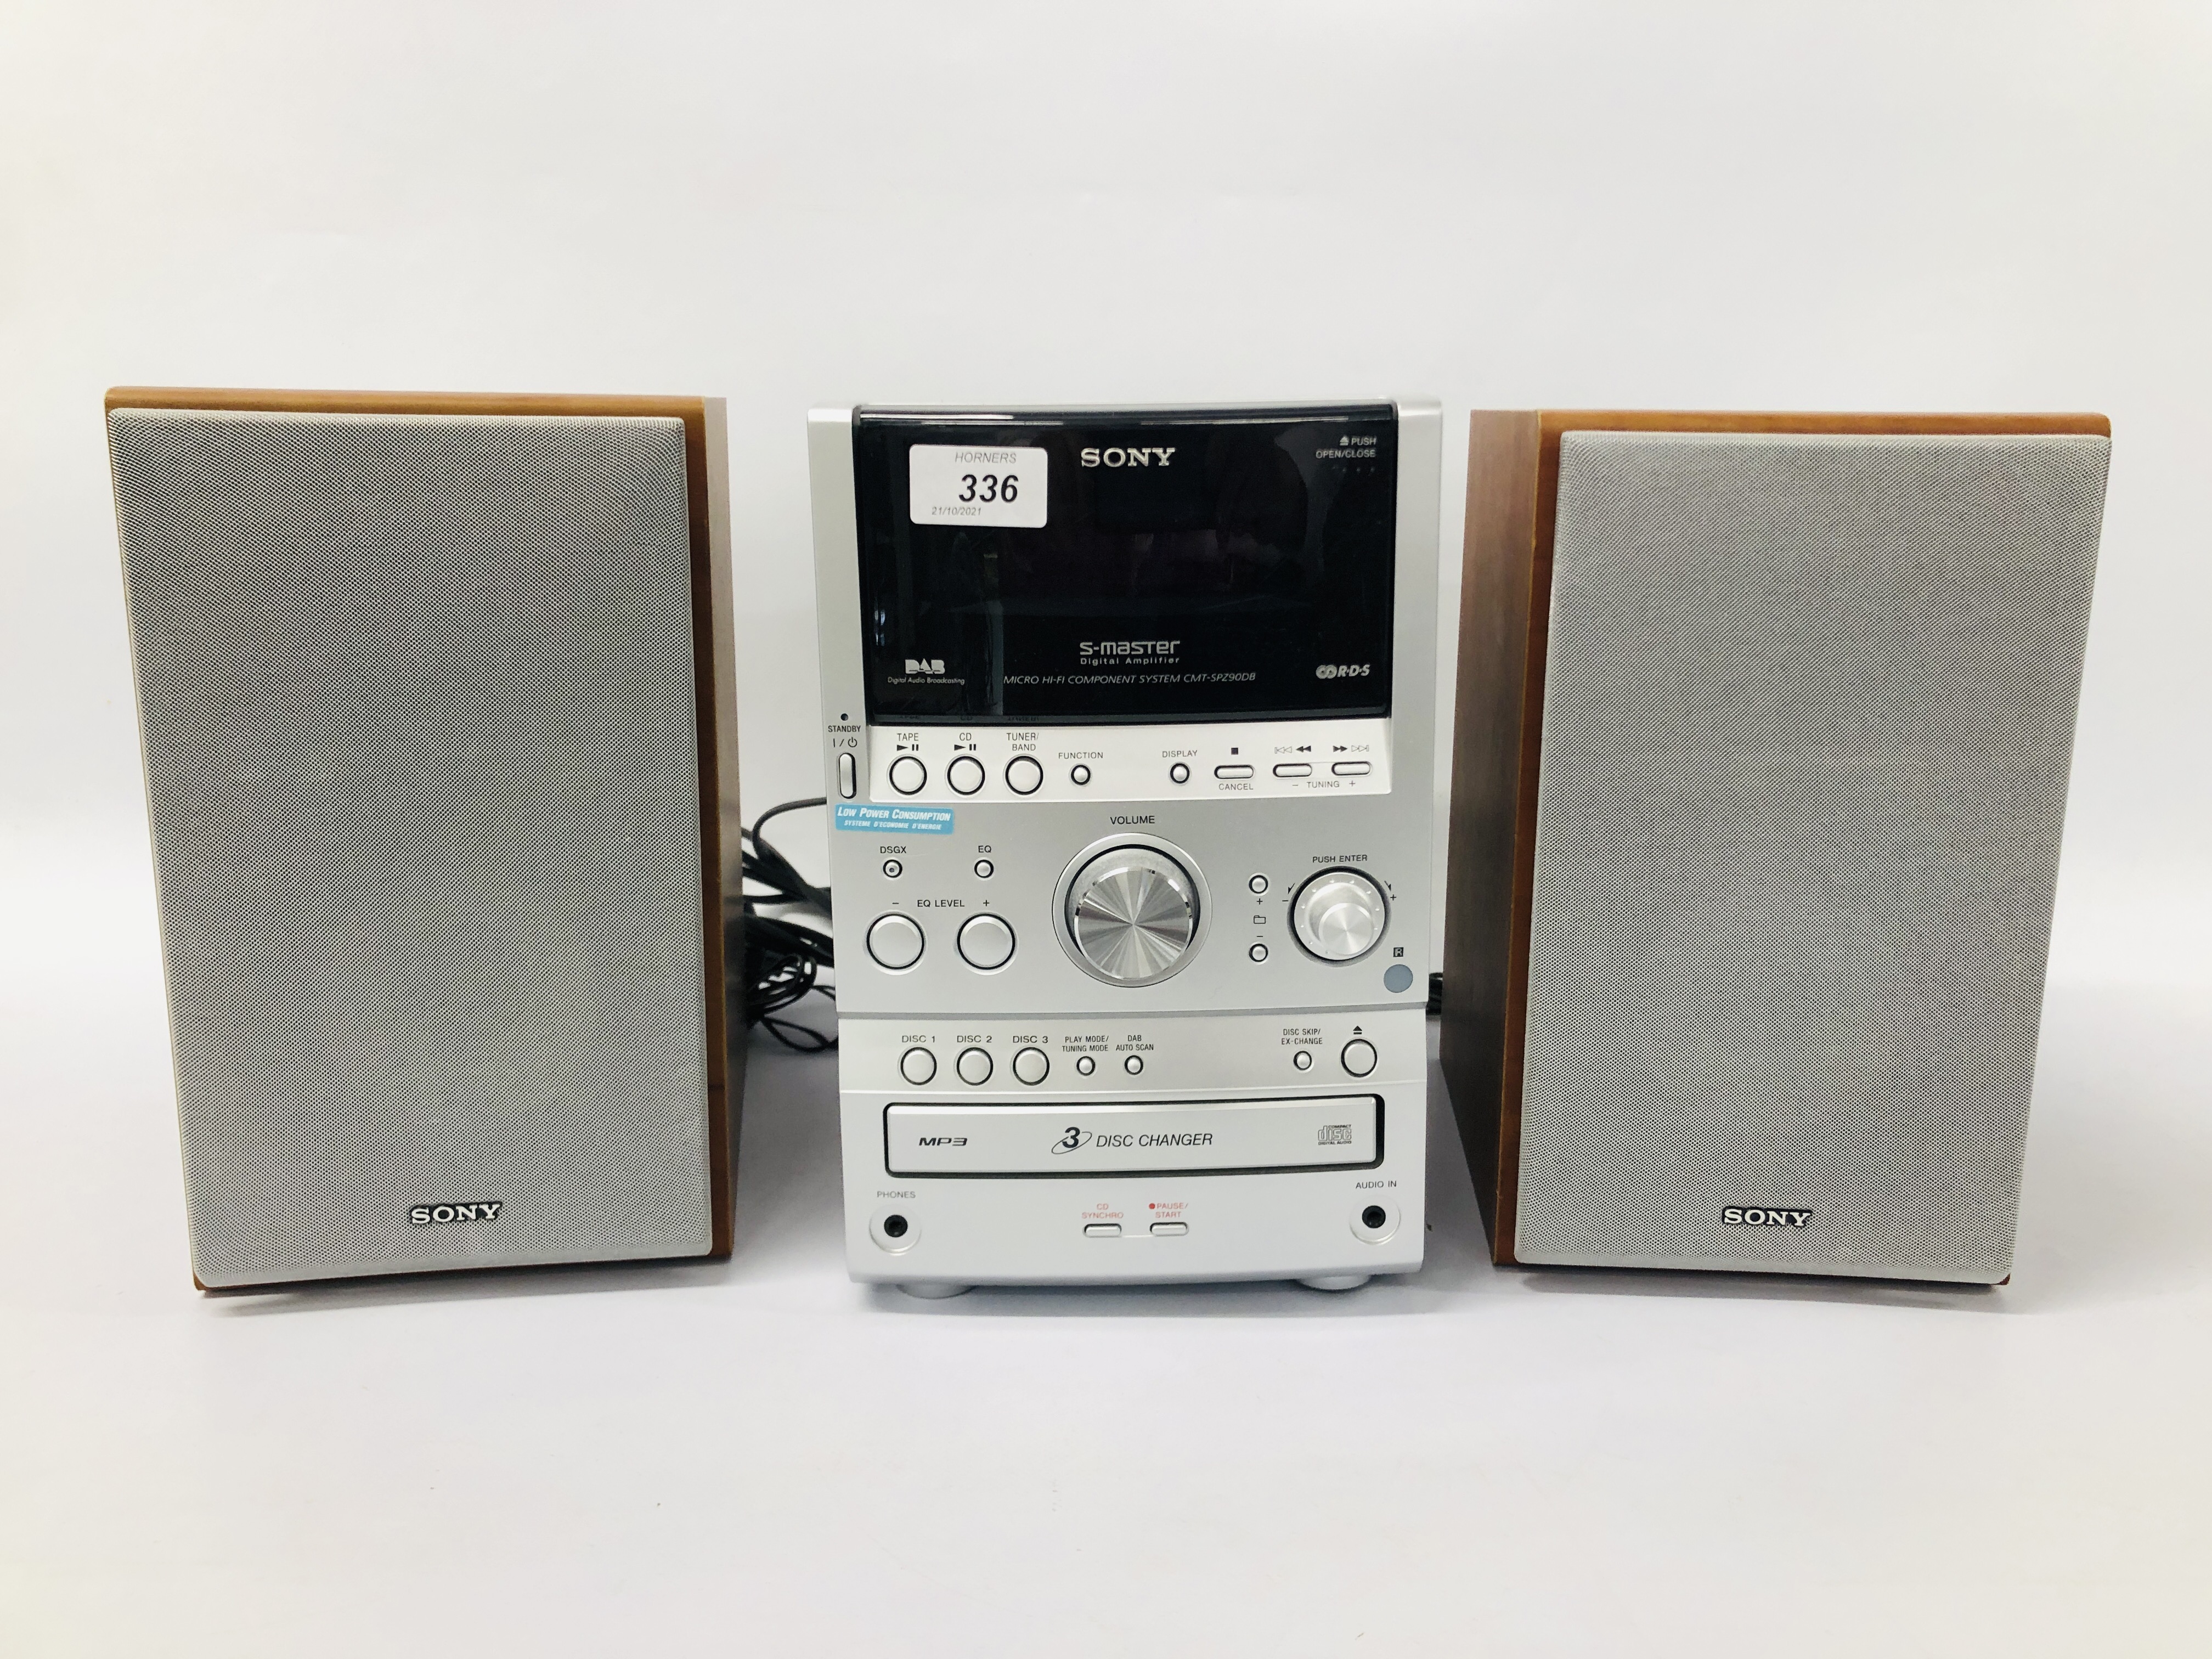 A SONY S-MASTER DAB HI-FI SYSTEM COMPLETE WITH REMOTE - SOLD AS SEEN